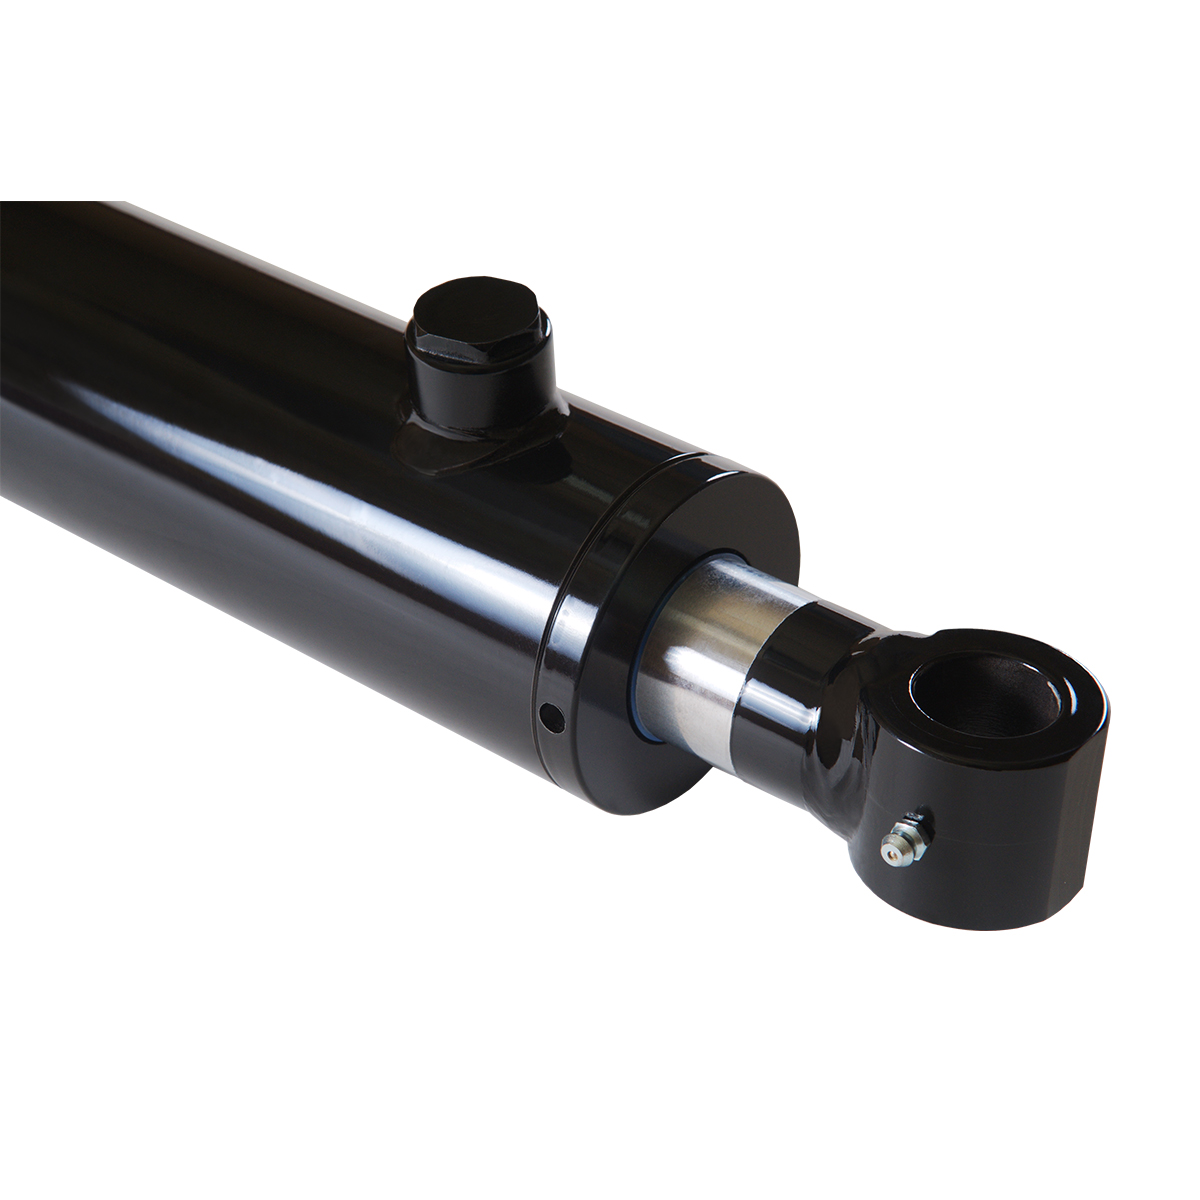 2.5 bore x 30 stroke hydraulic cylinder, welded tang double acting cylinder | Magister Hydraulics